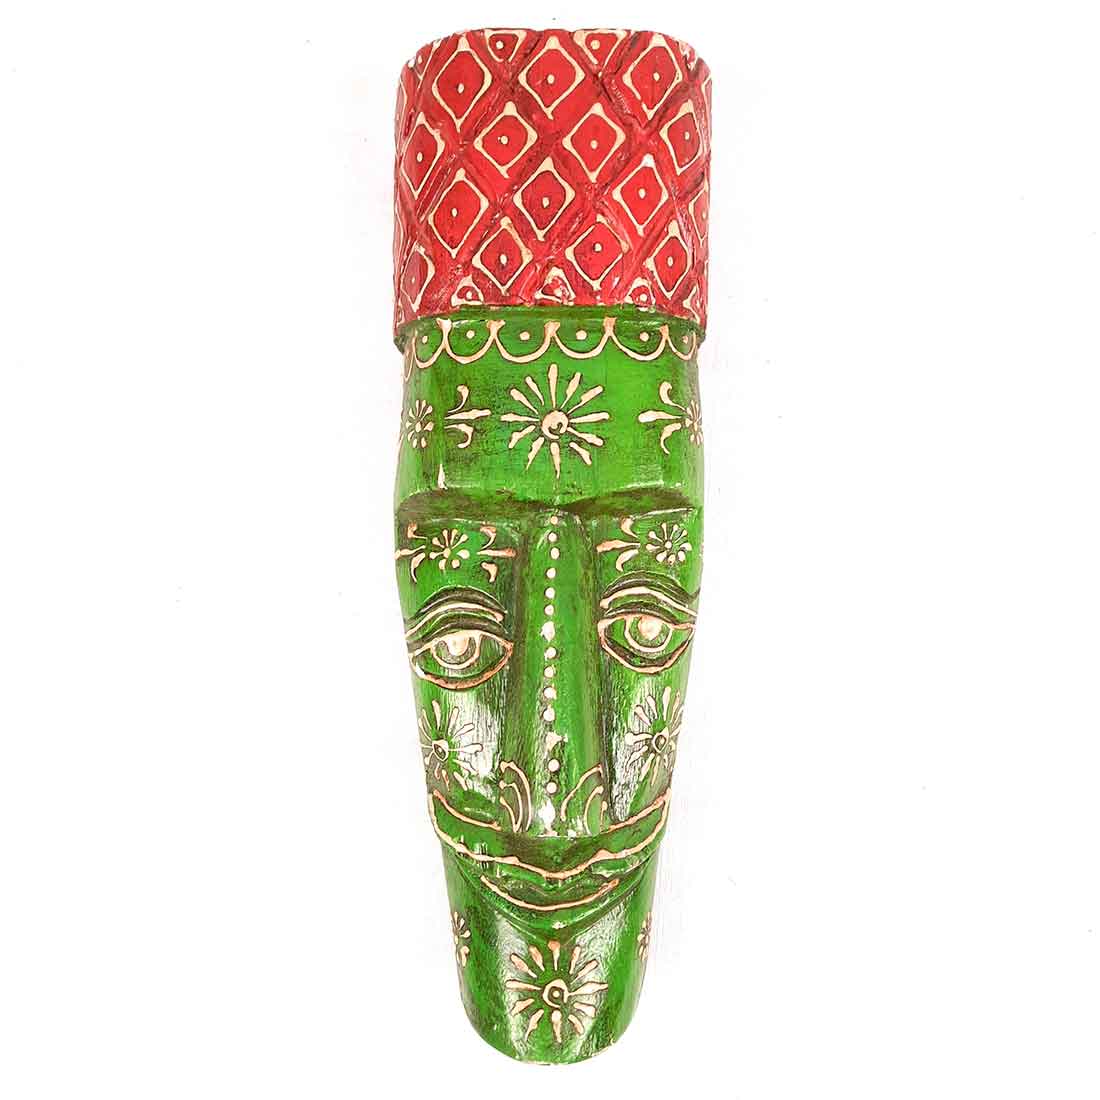 African Wall Mask | Tribal Mask Wall Hanging - for Home & Wall Decor - 12 Inch -Apkamart #style_pack of 1